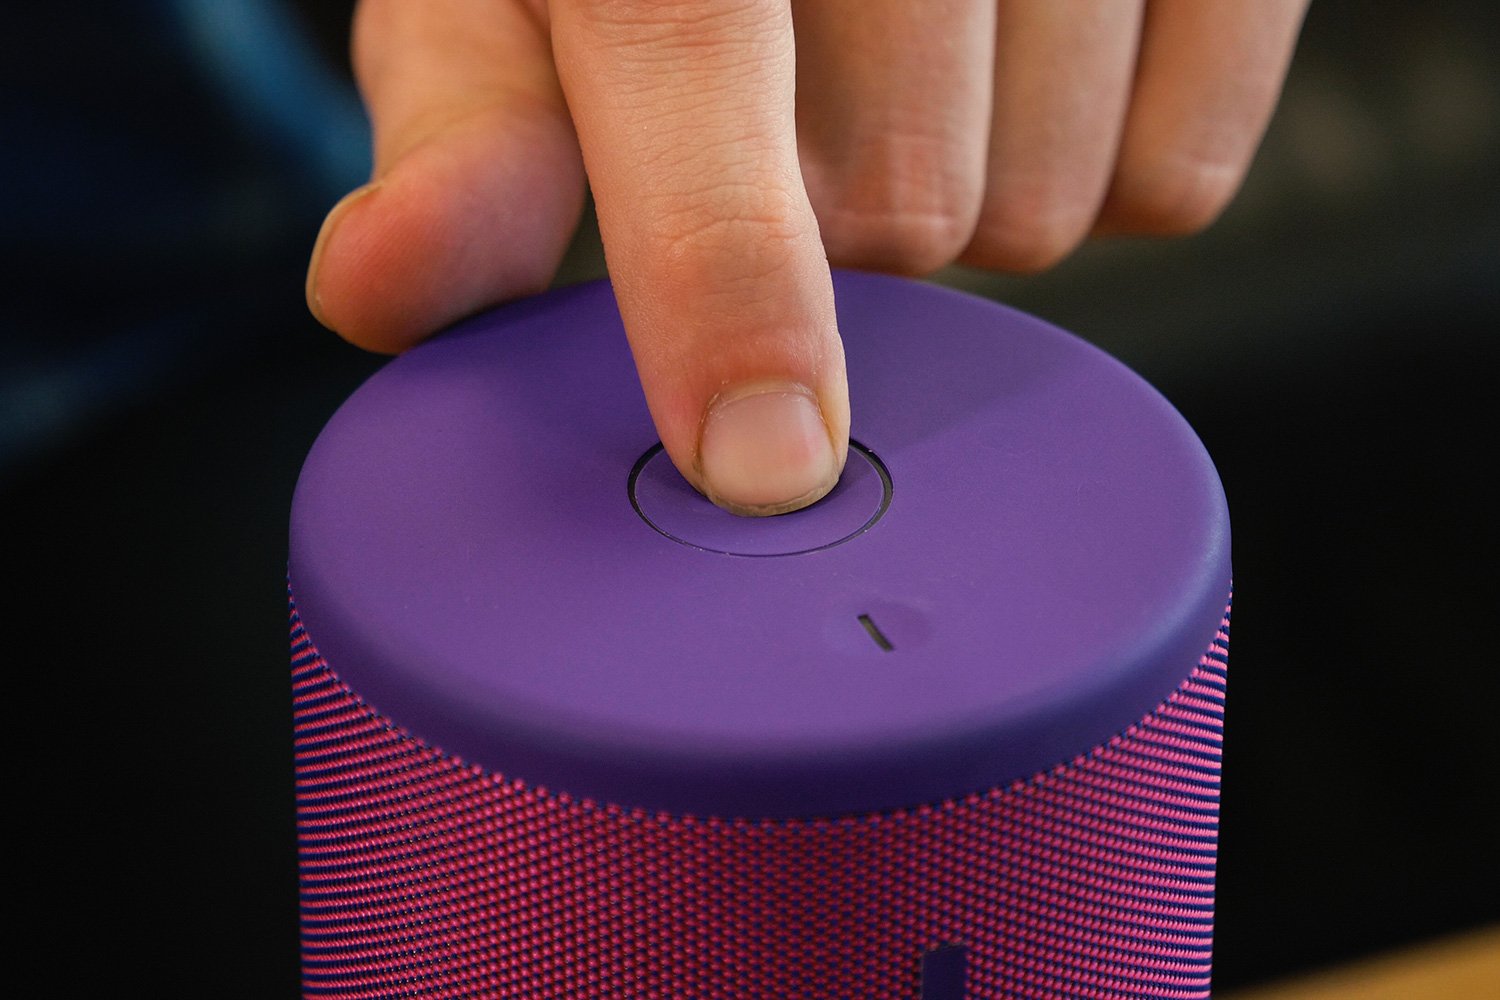 Review: Ultimate Ears' Boom 3 is a solid Bluetooth speaker with a